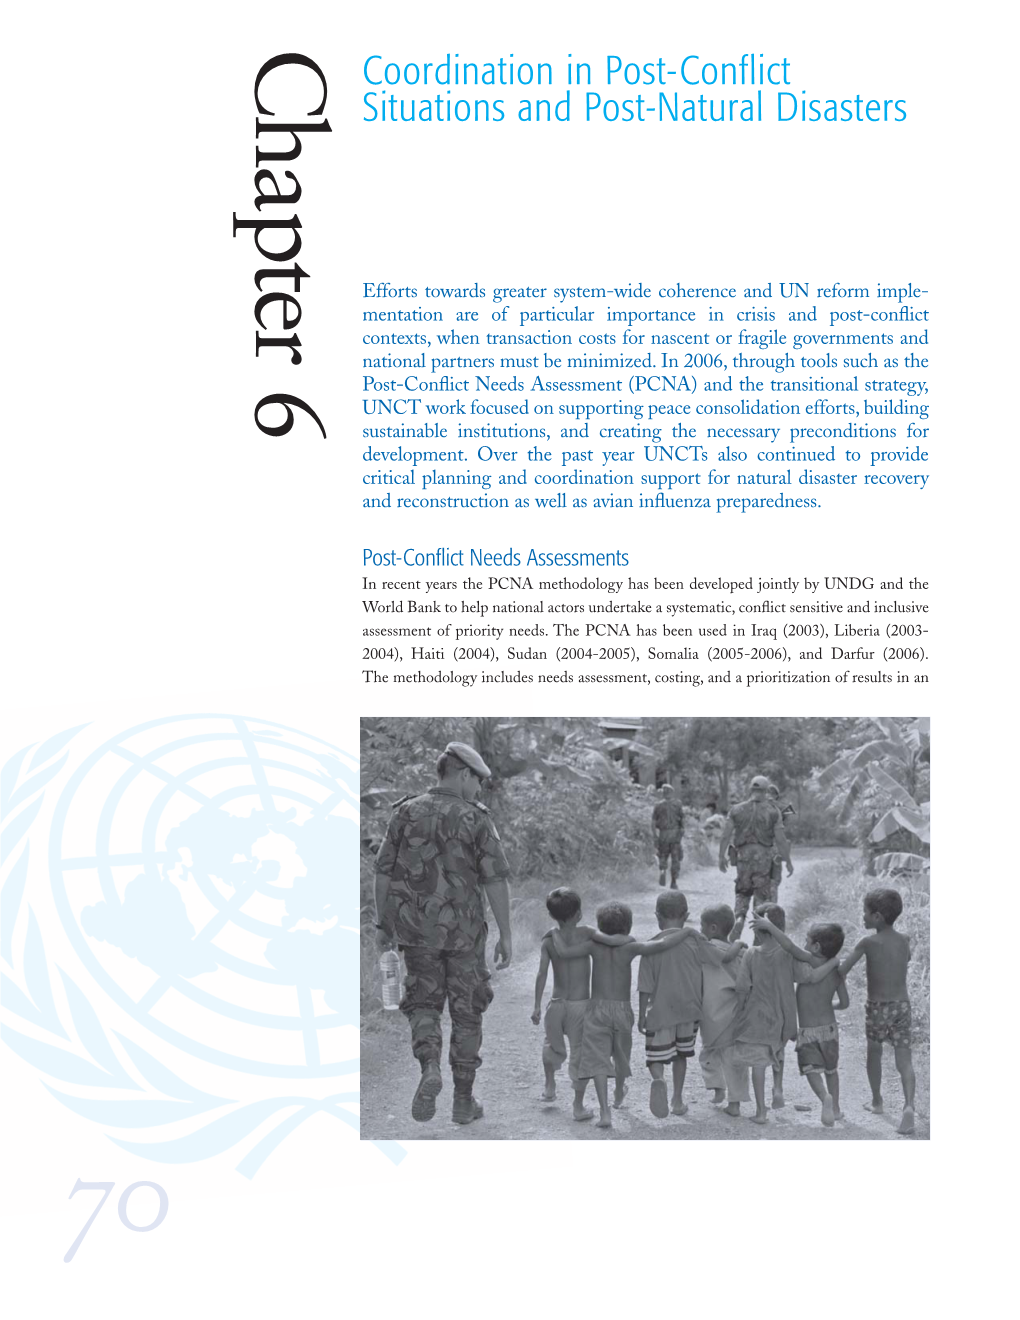 Coordination in Post-Conflict Situations and Post-Natural Disasters